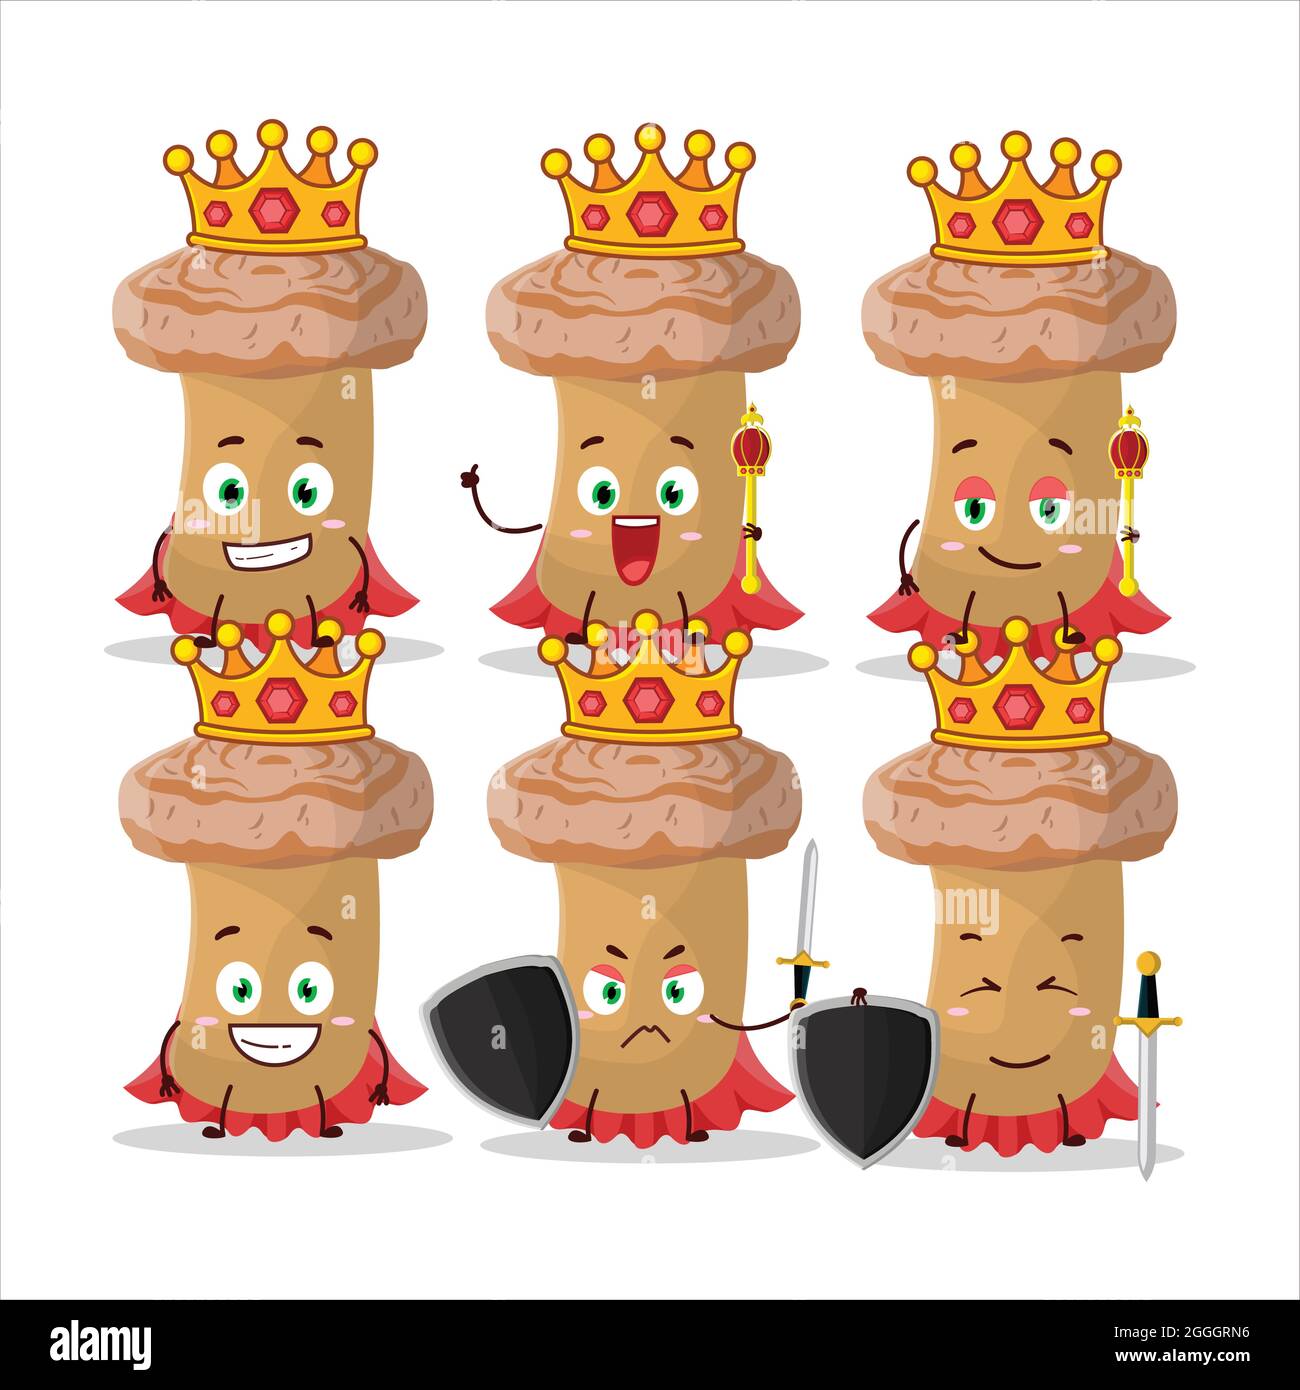 A Charismatic King woolly milkcap cartoon character wearing a gold crown. Vector illustration Stock Vector